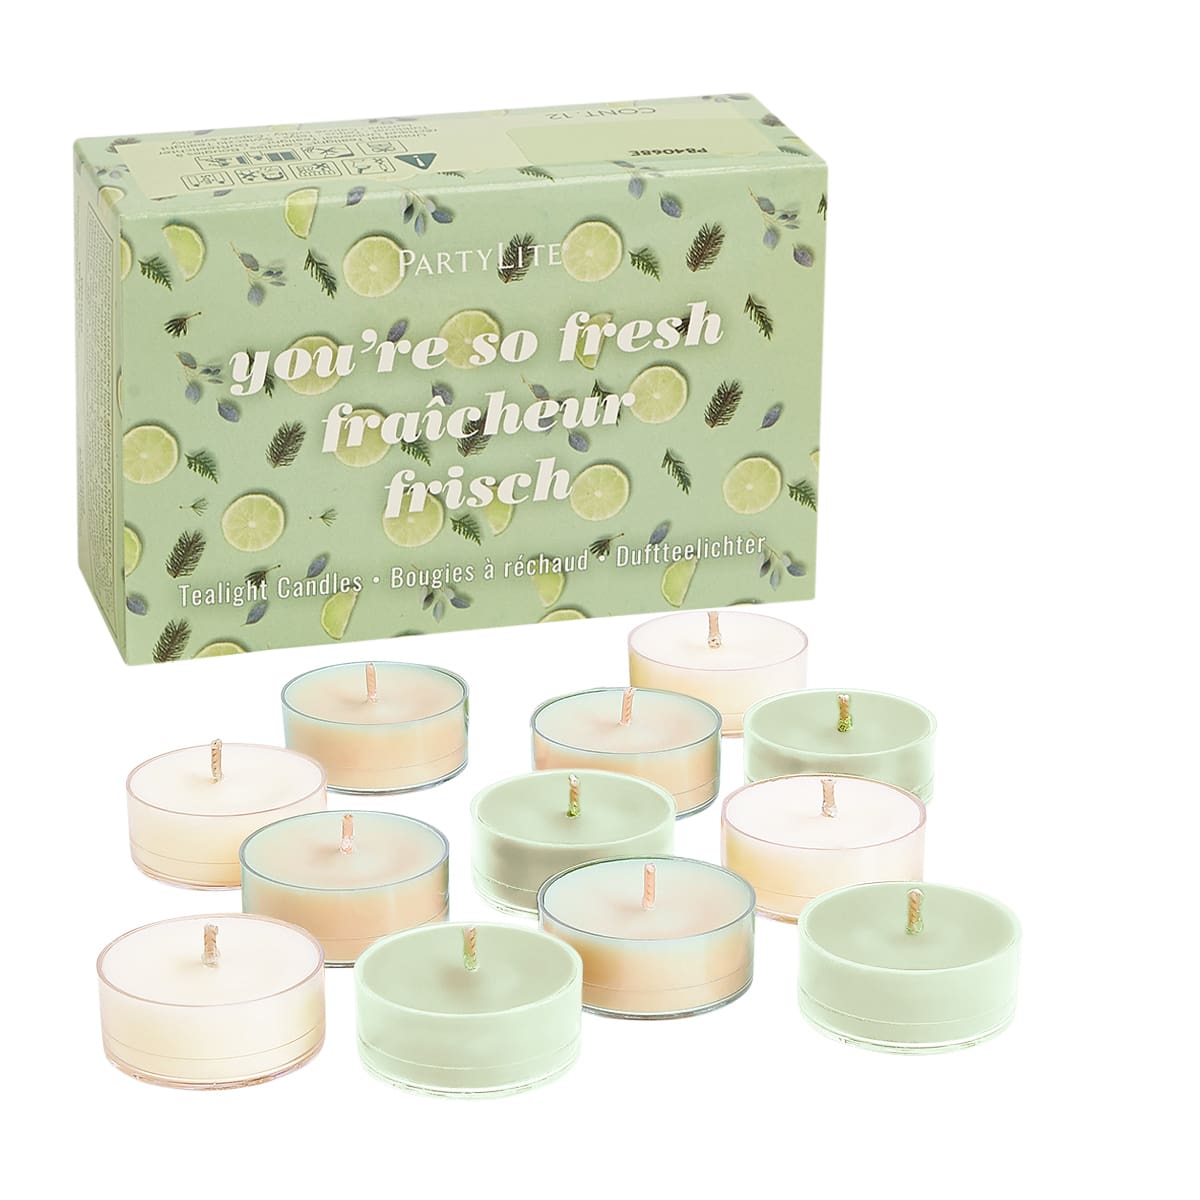 You're So Fresh 12-Piece Tealight Candles Sampler - PartyLite US